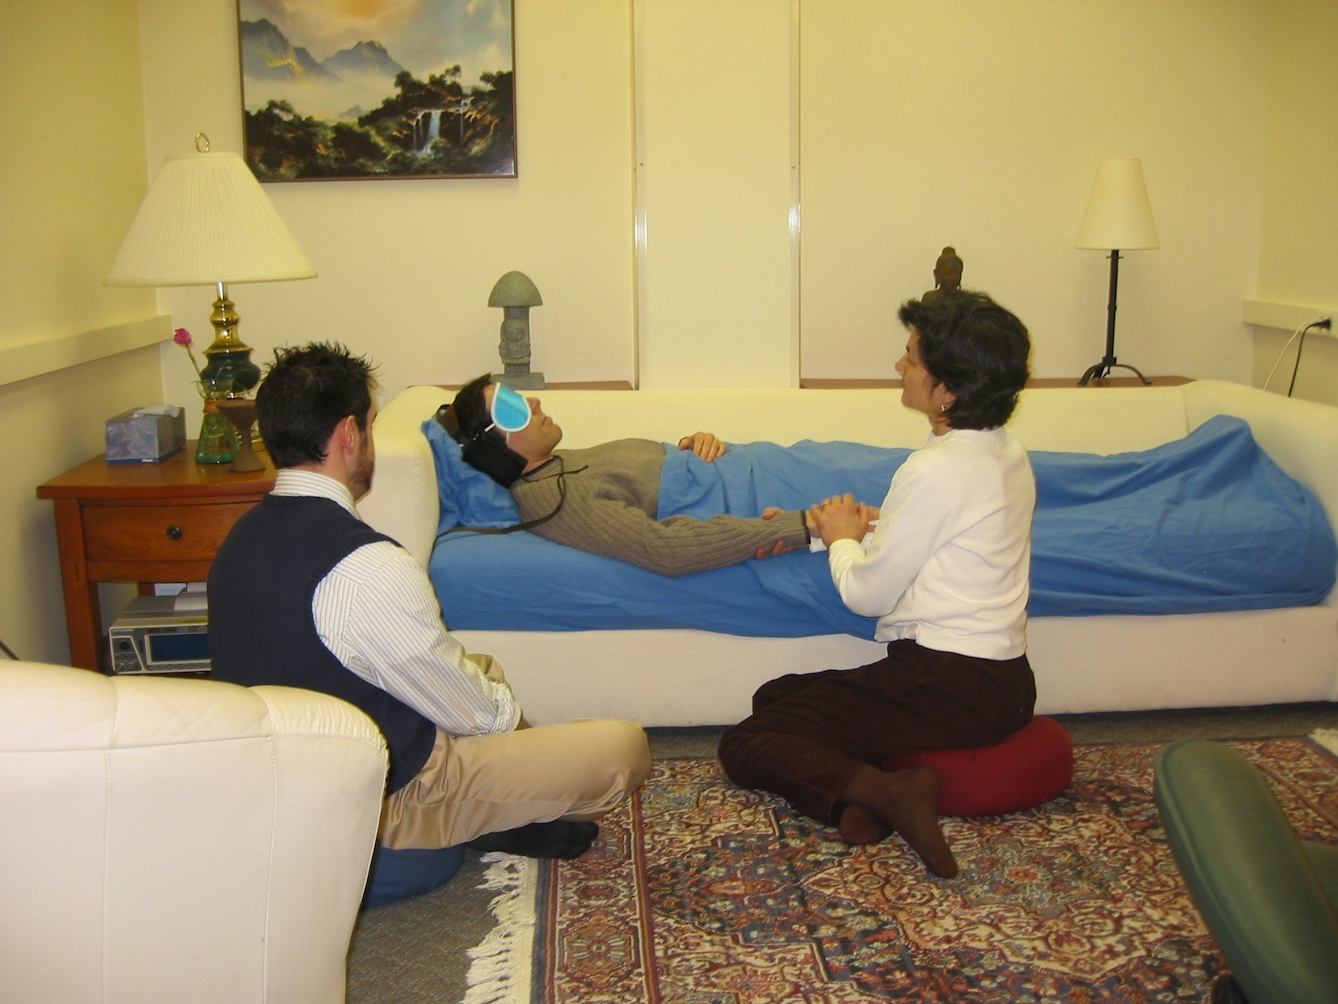 A photo of one of the comfortable rooms at Johns Hopkins University used in clinical studies to determine the effects of psilocybin and other hallucinogenic drugs. Two guides are seated beside a figure lying on a sofa.